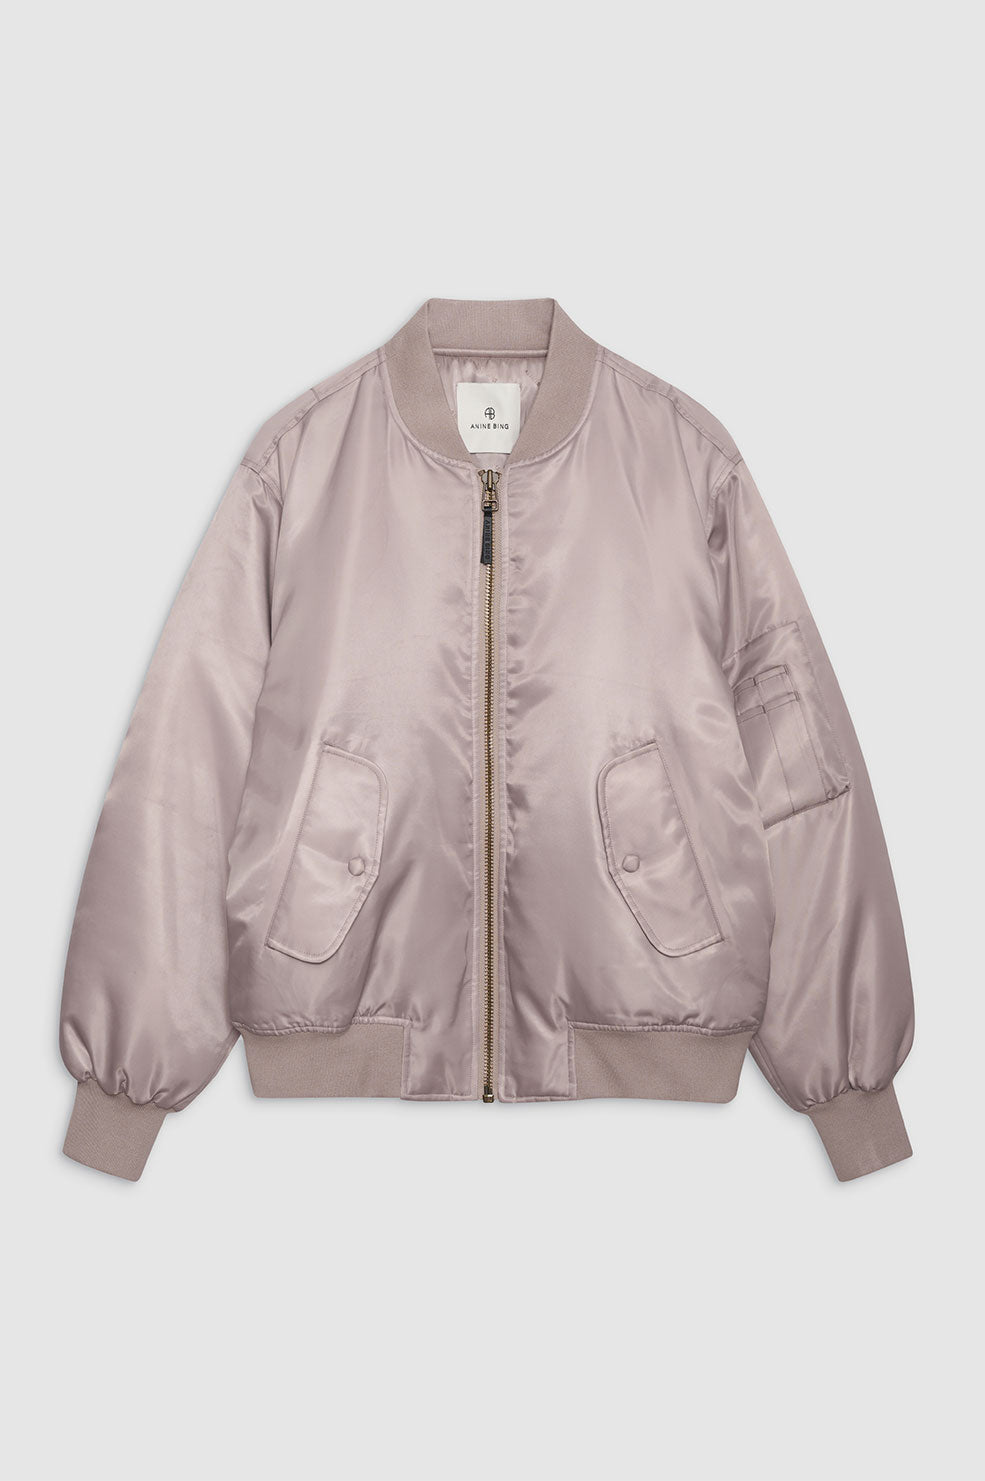 ANINE BING Leon Bomber - Champagne - Front View